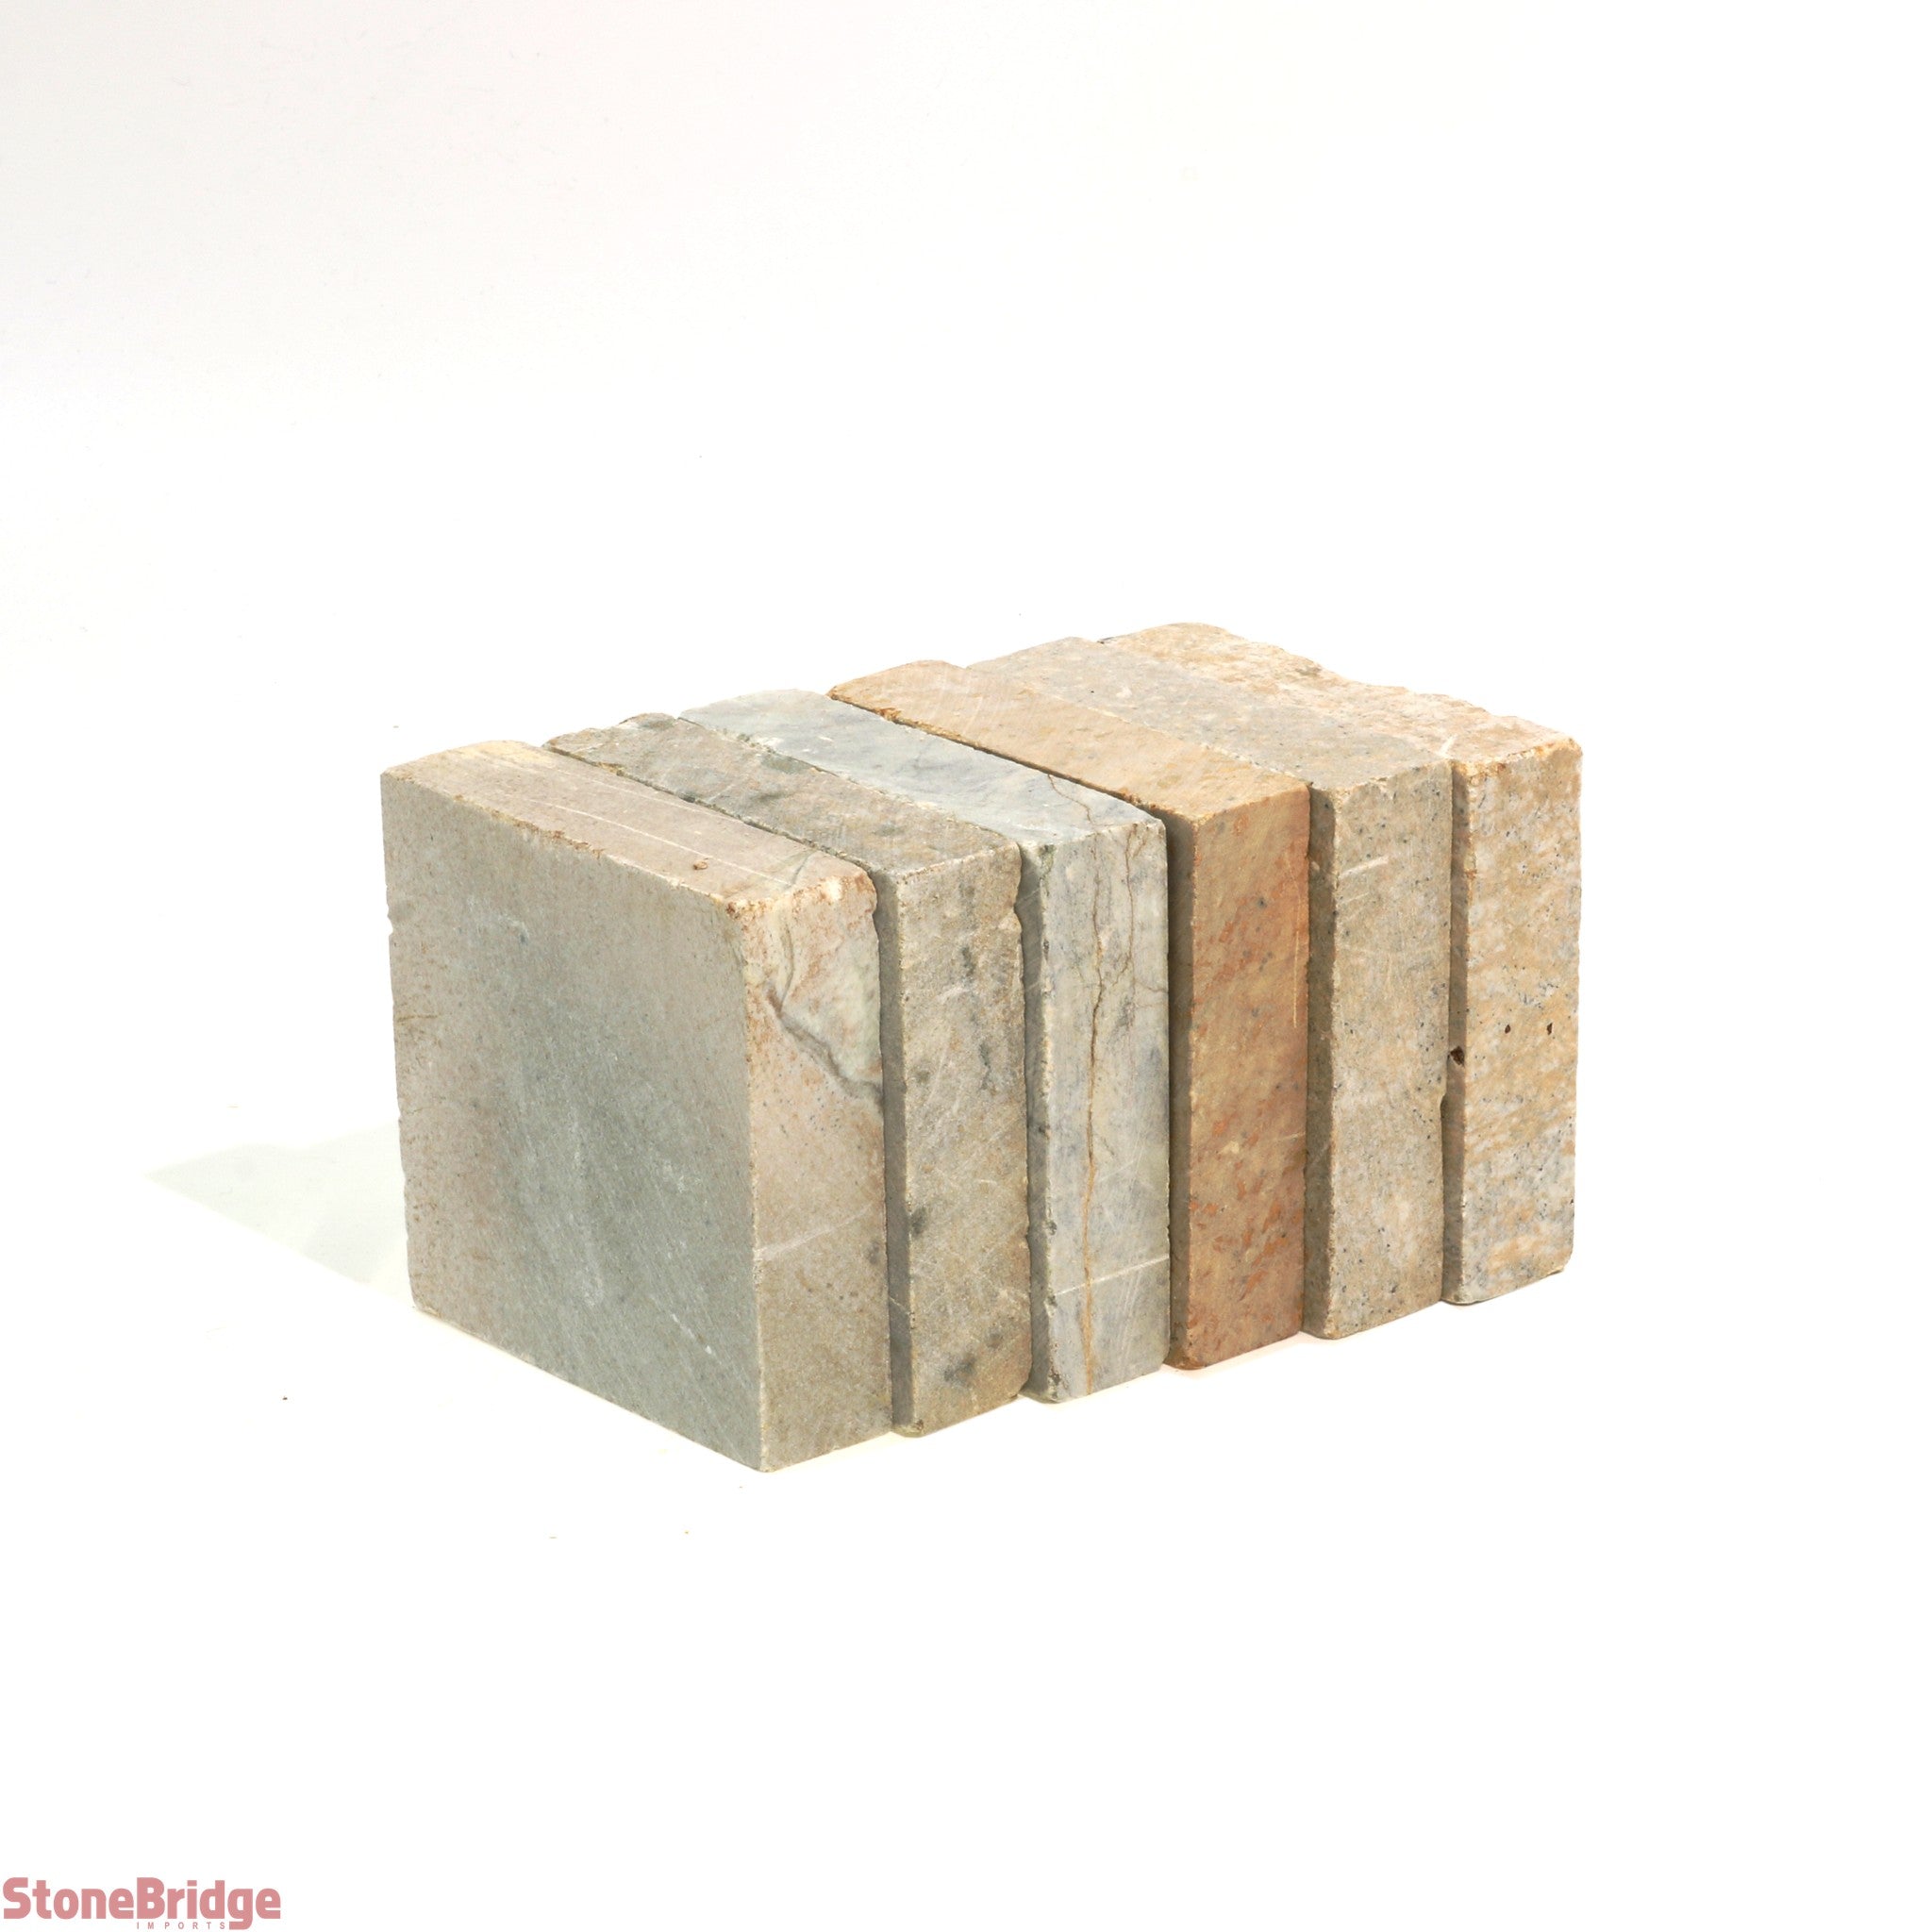 Soapstone Block for Carving - 6 Pack